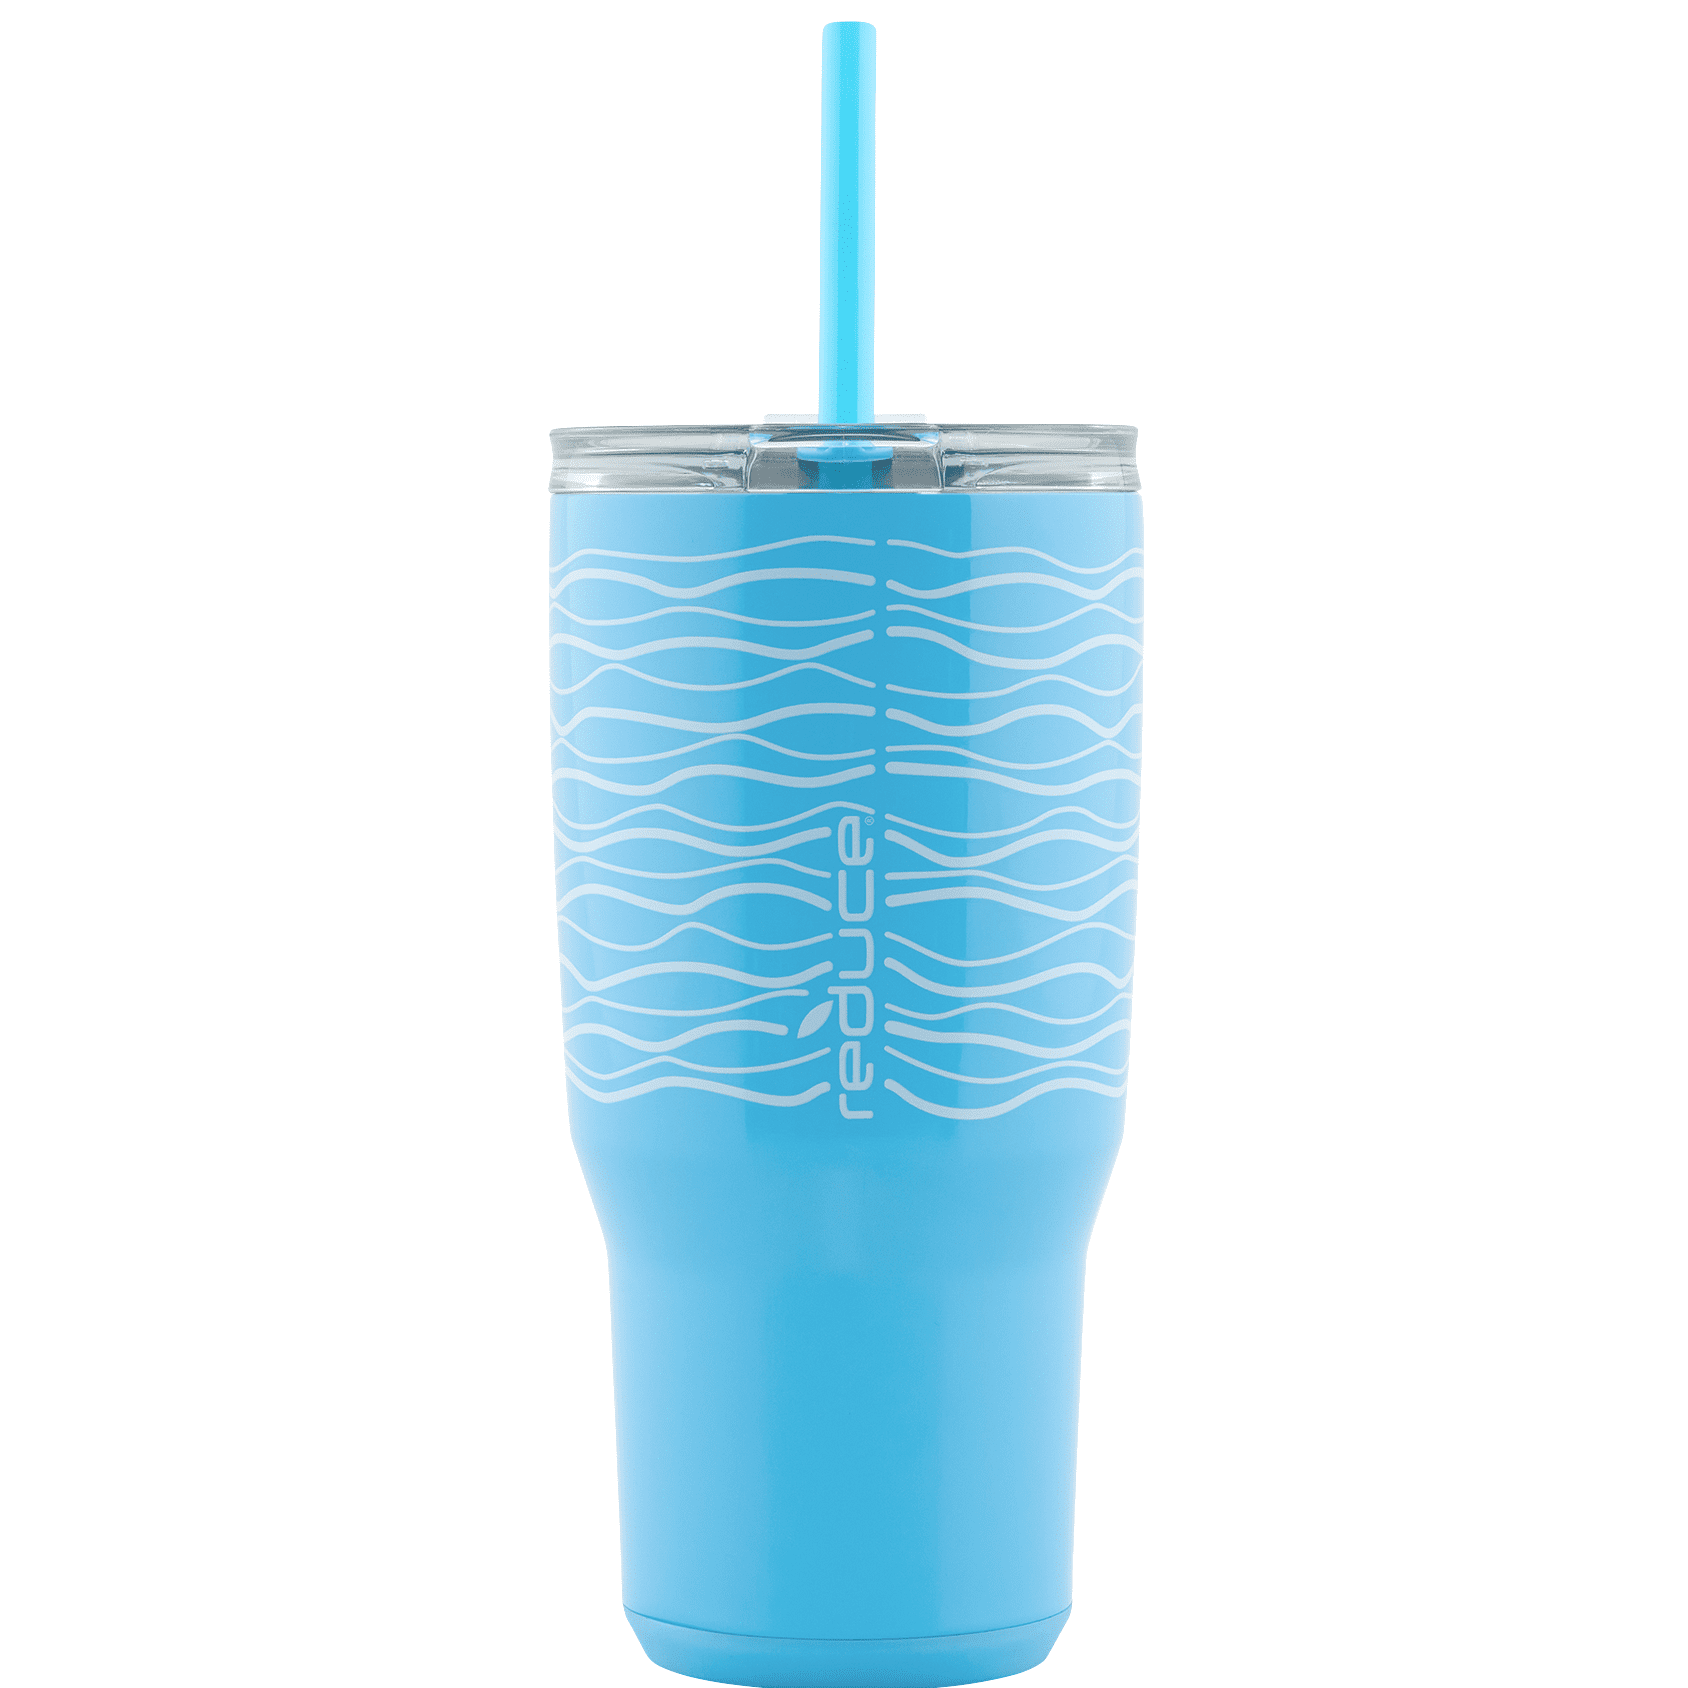 Reduce 34oz Cold1 Insulated Stainless Steel Straw Tumbler - Cotton